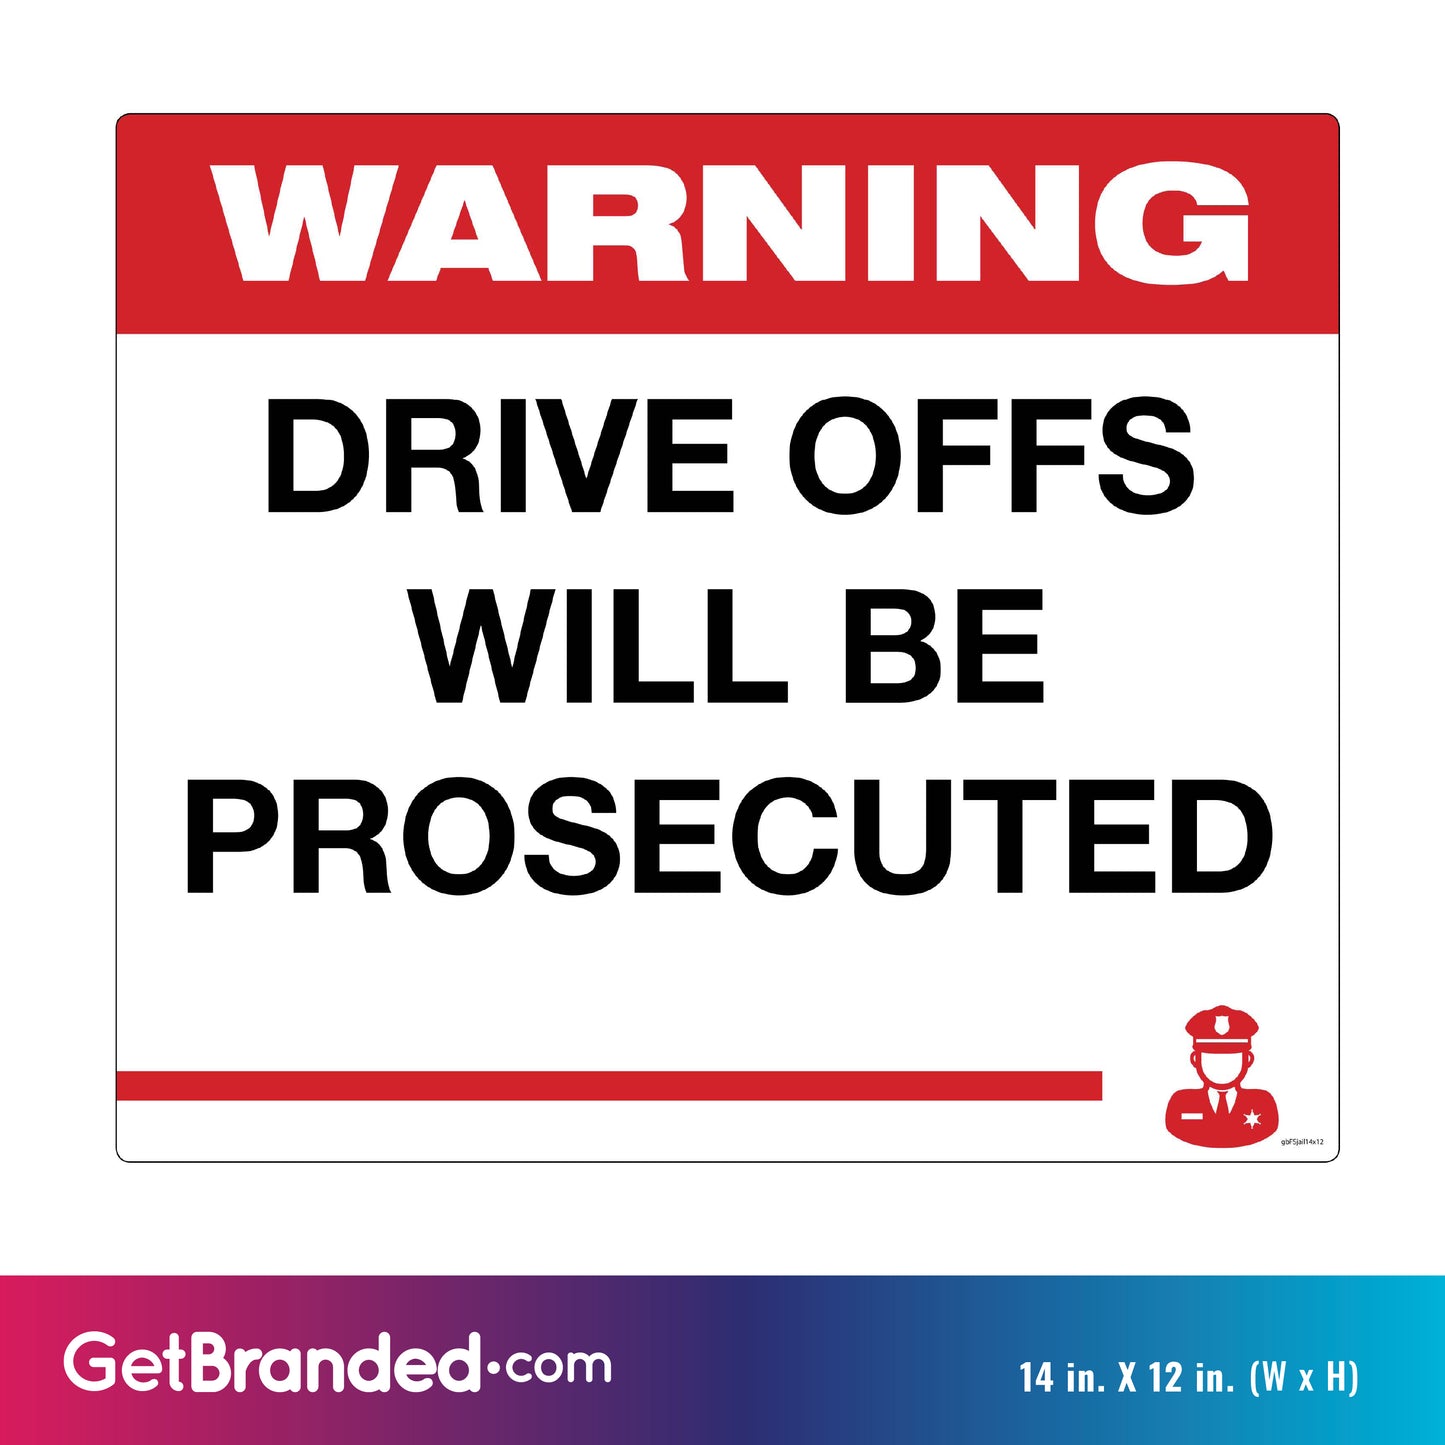 Warning Drive Offs Will Be Prosecuted Decal size guide.